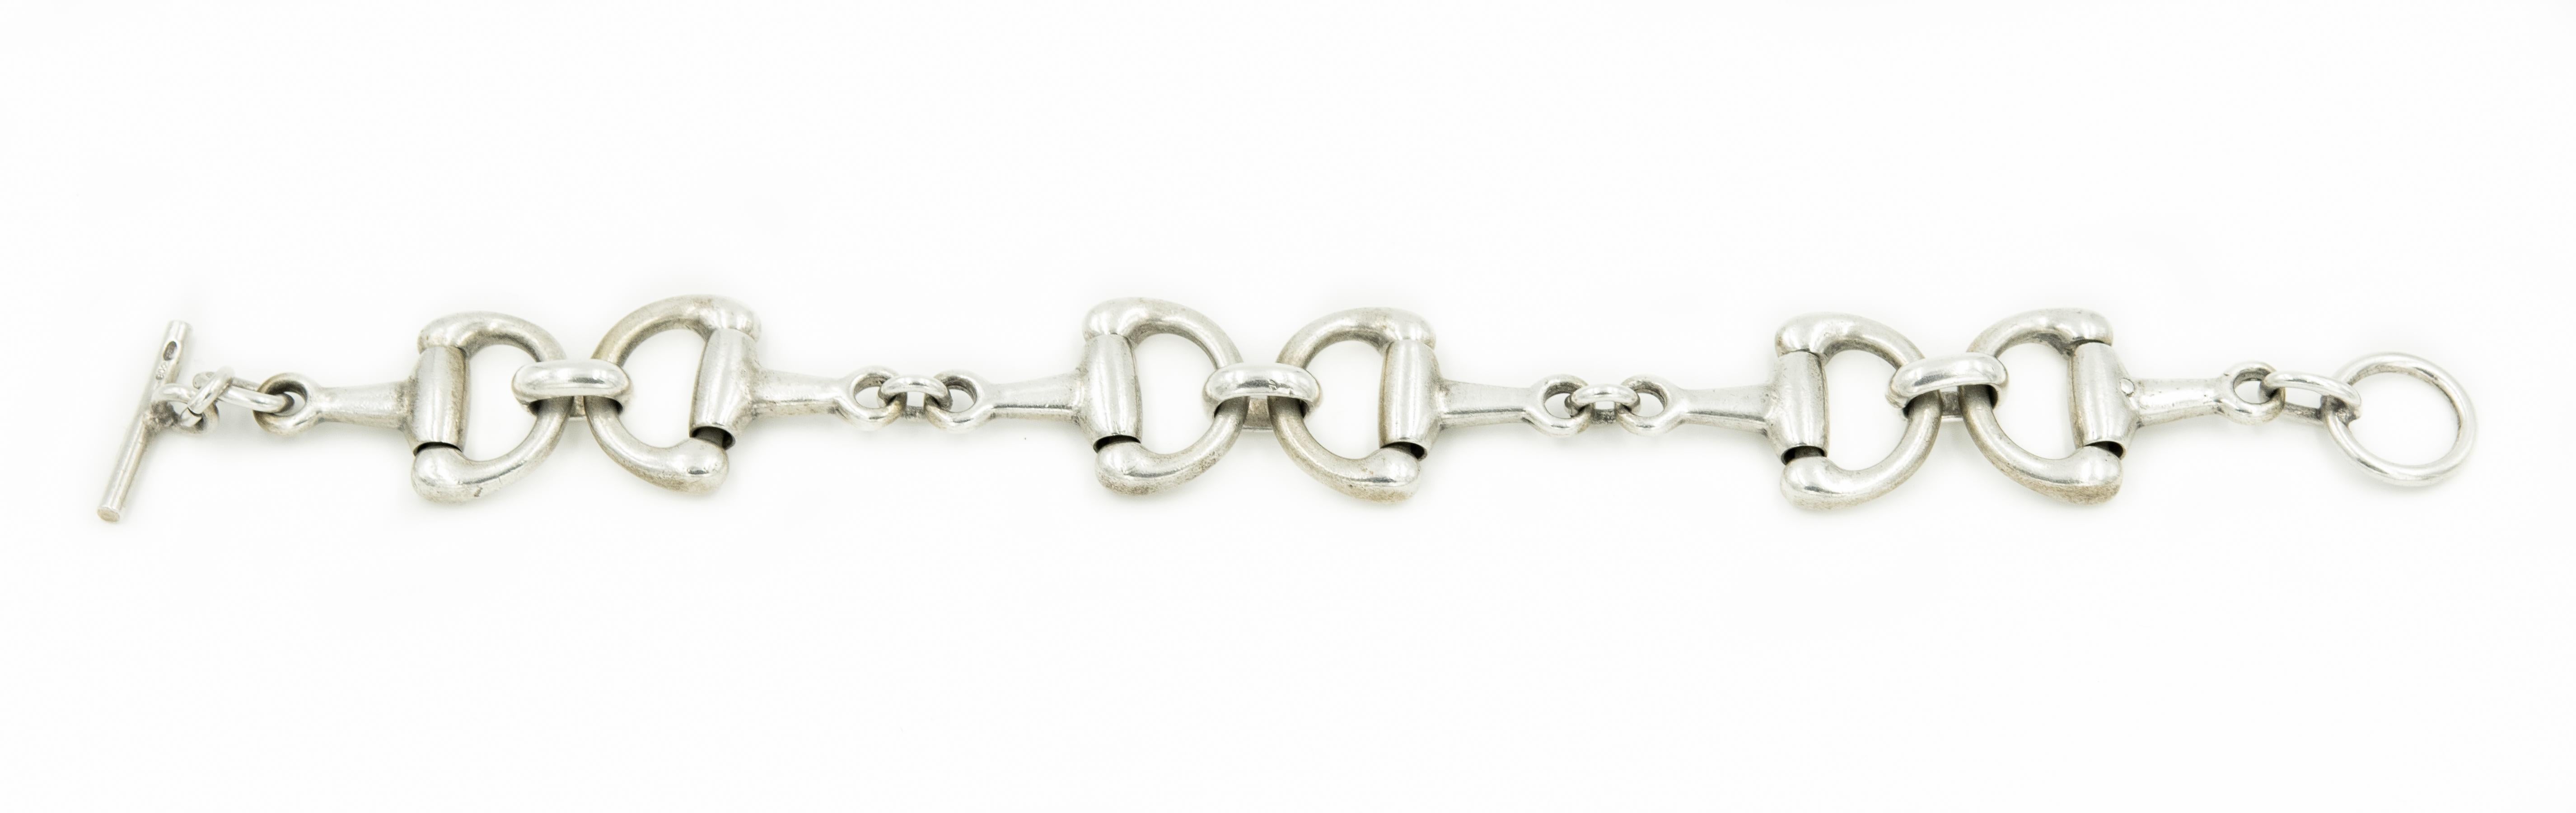 Italian 800 silver Gucci style horse bit link bracelet with a toggle closure.

Marked 800 and  hallmarked BBL